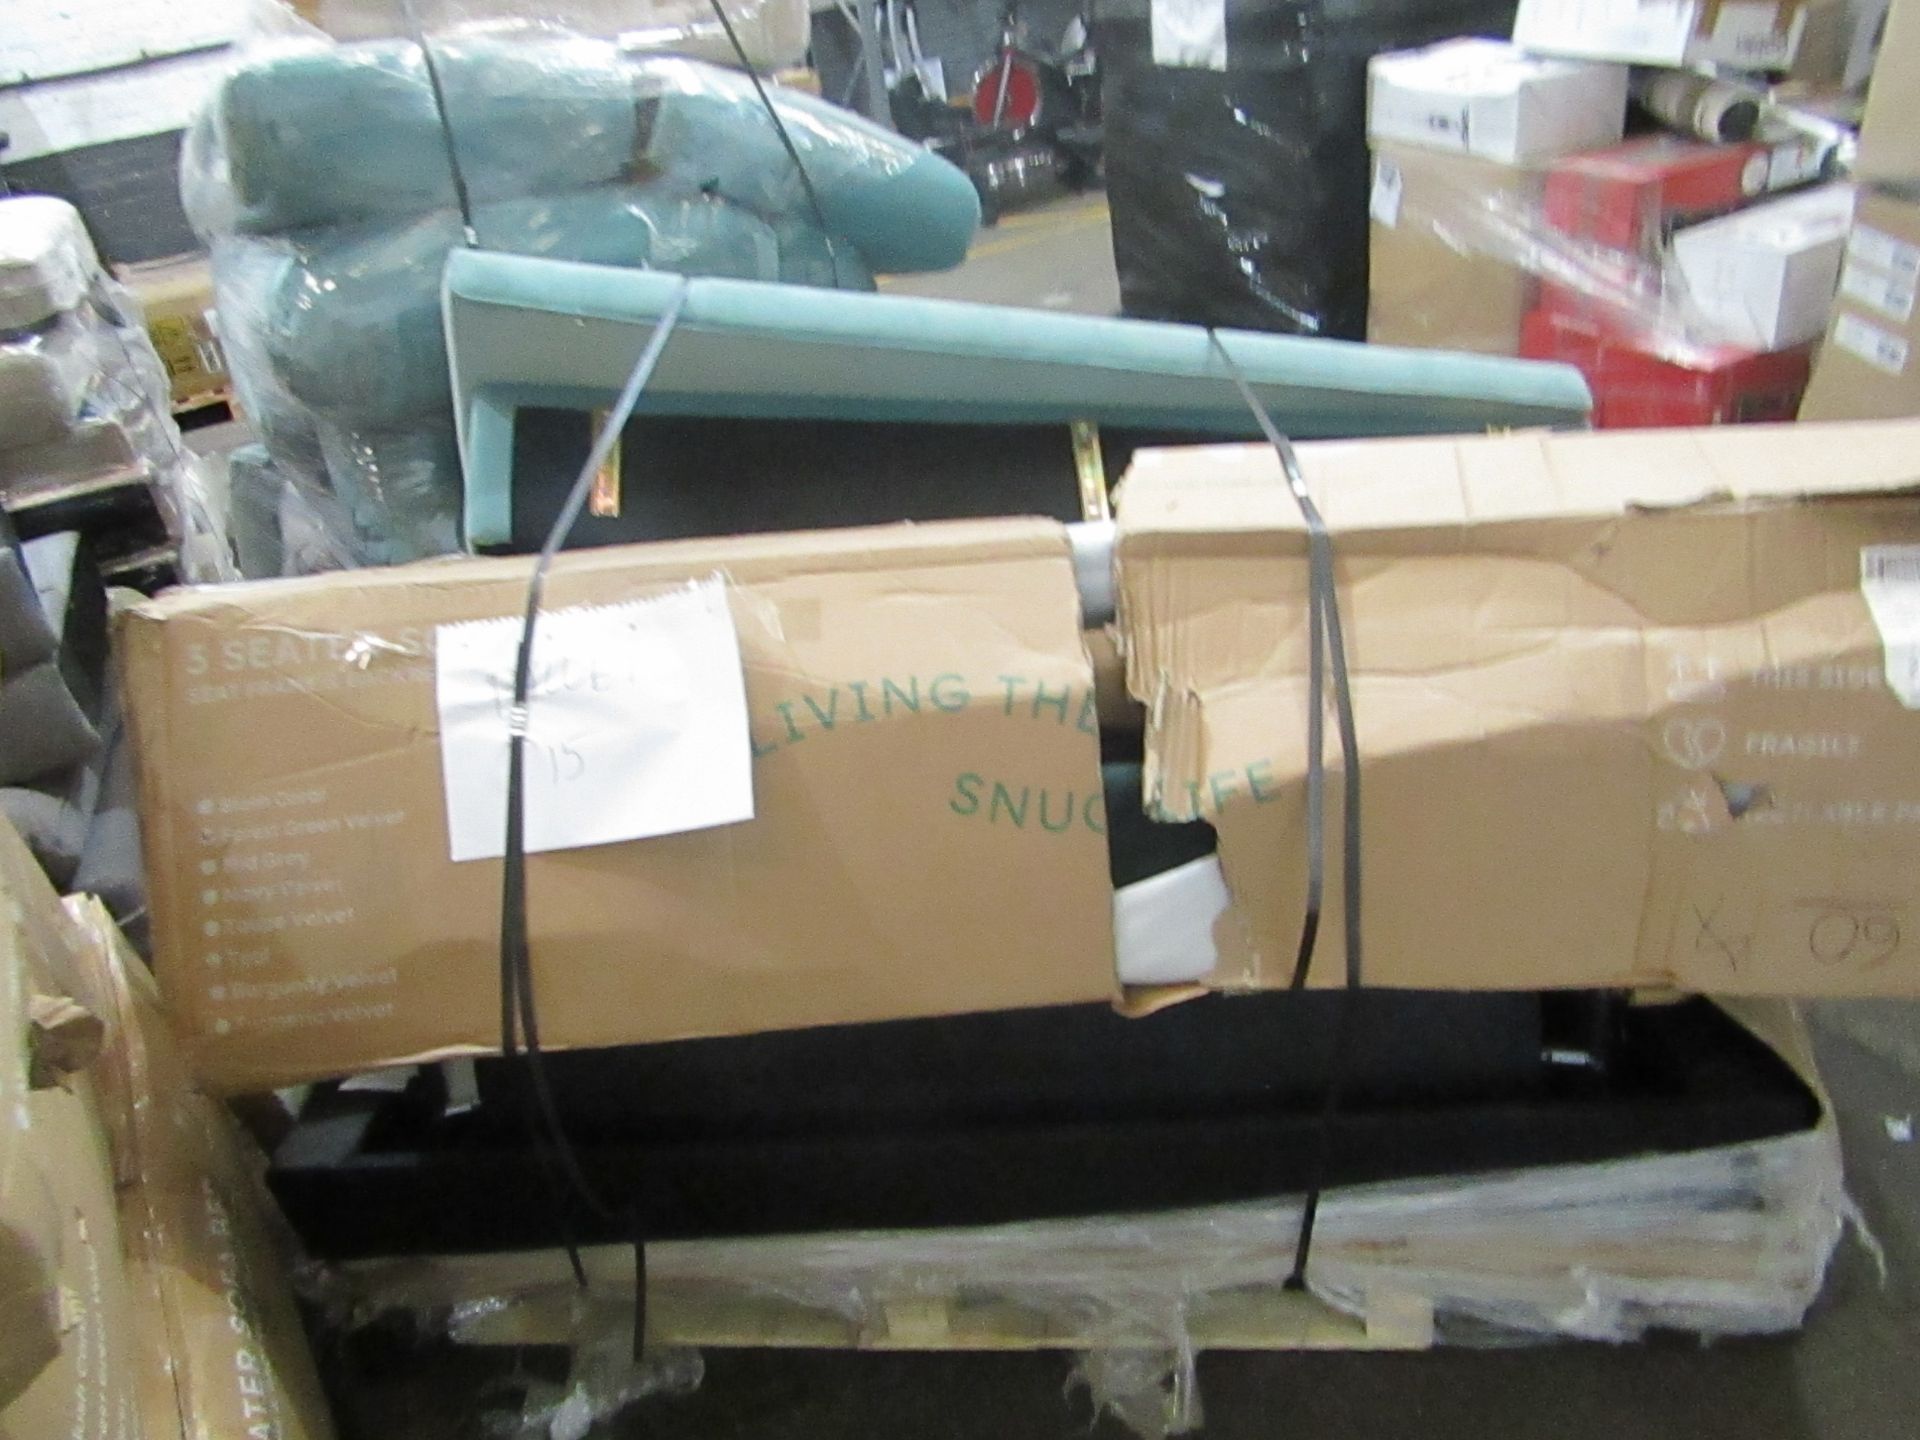 0% Buyers Premium, 24 Pallets of Genuine SNUG SOFA parts - Mixed Lots of Bases Backs Arms Cushions - Image 19 of 20